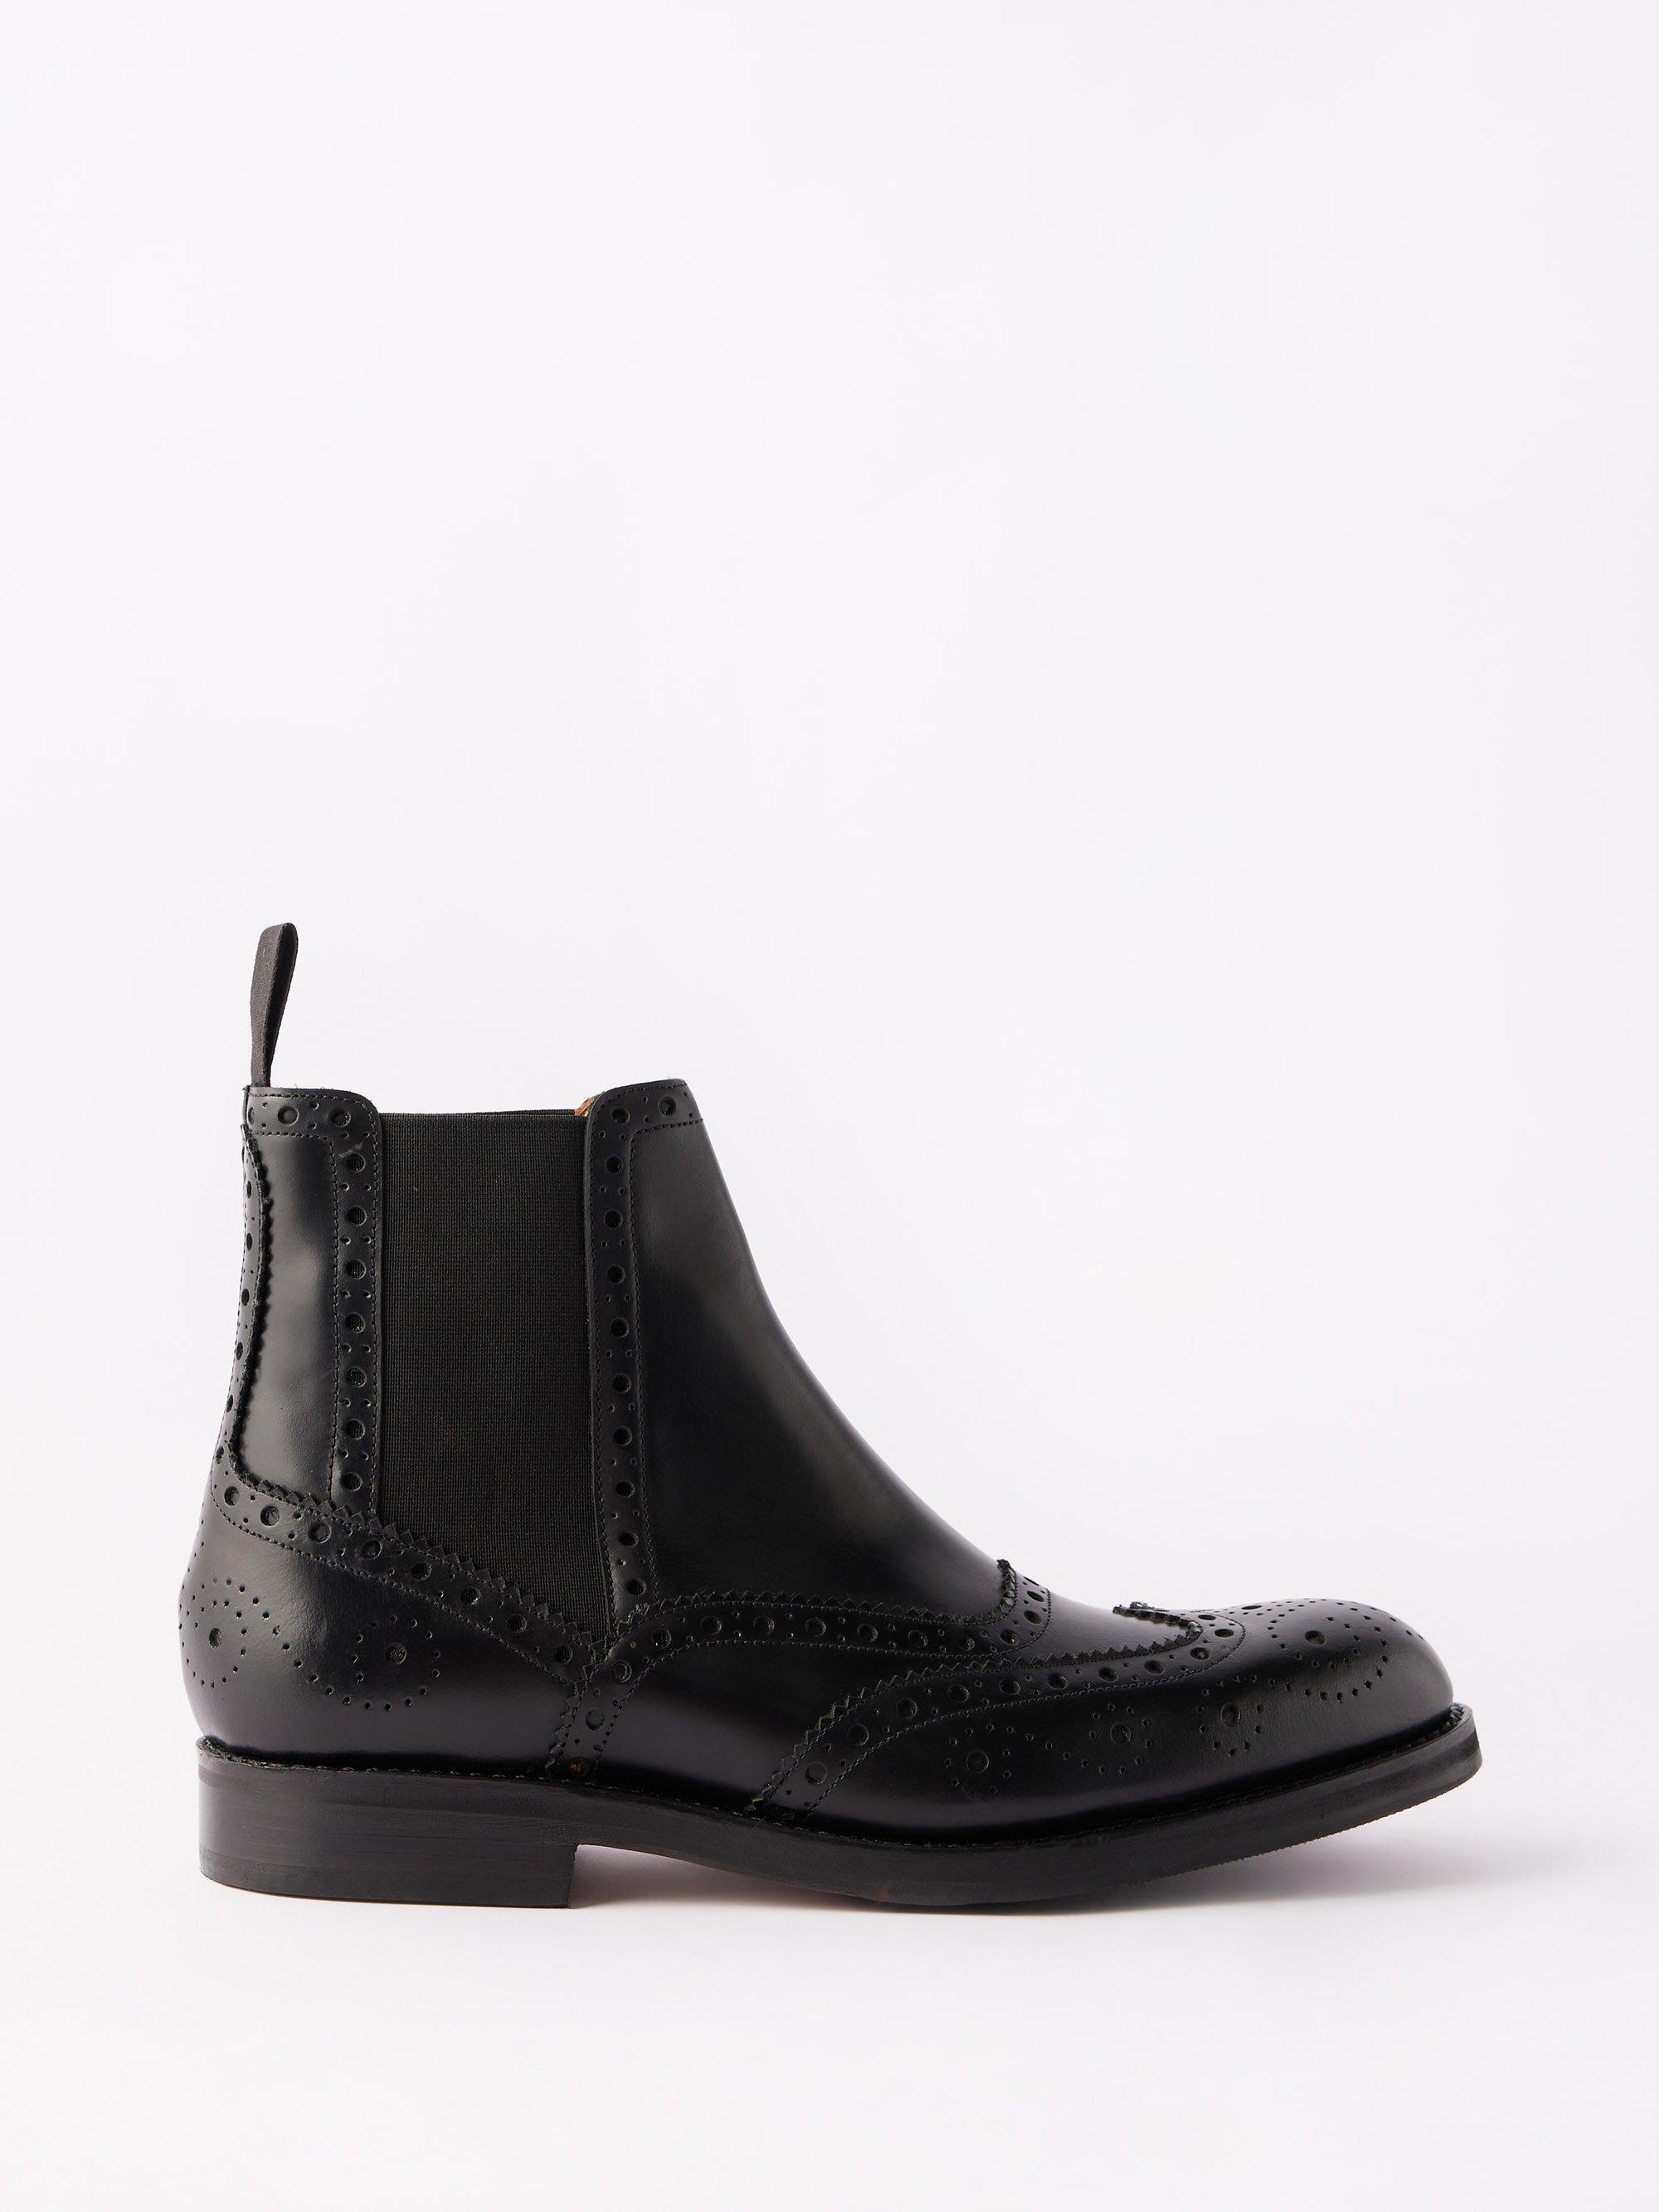 Grenson Ralph Brogued Leather Chelsea Boots in Black Men | Lyst